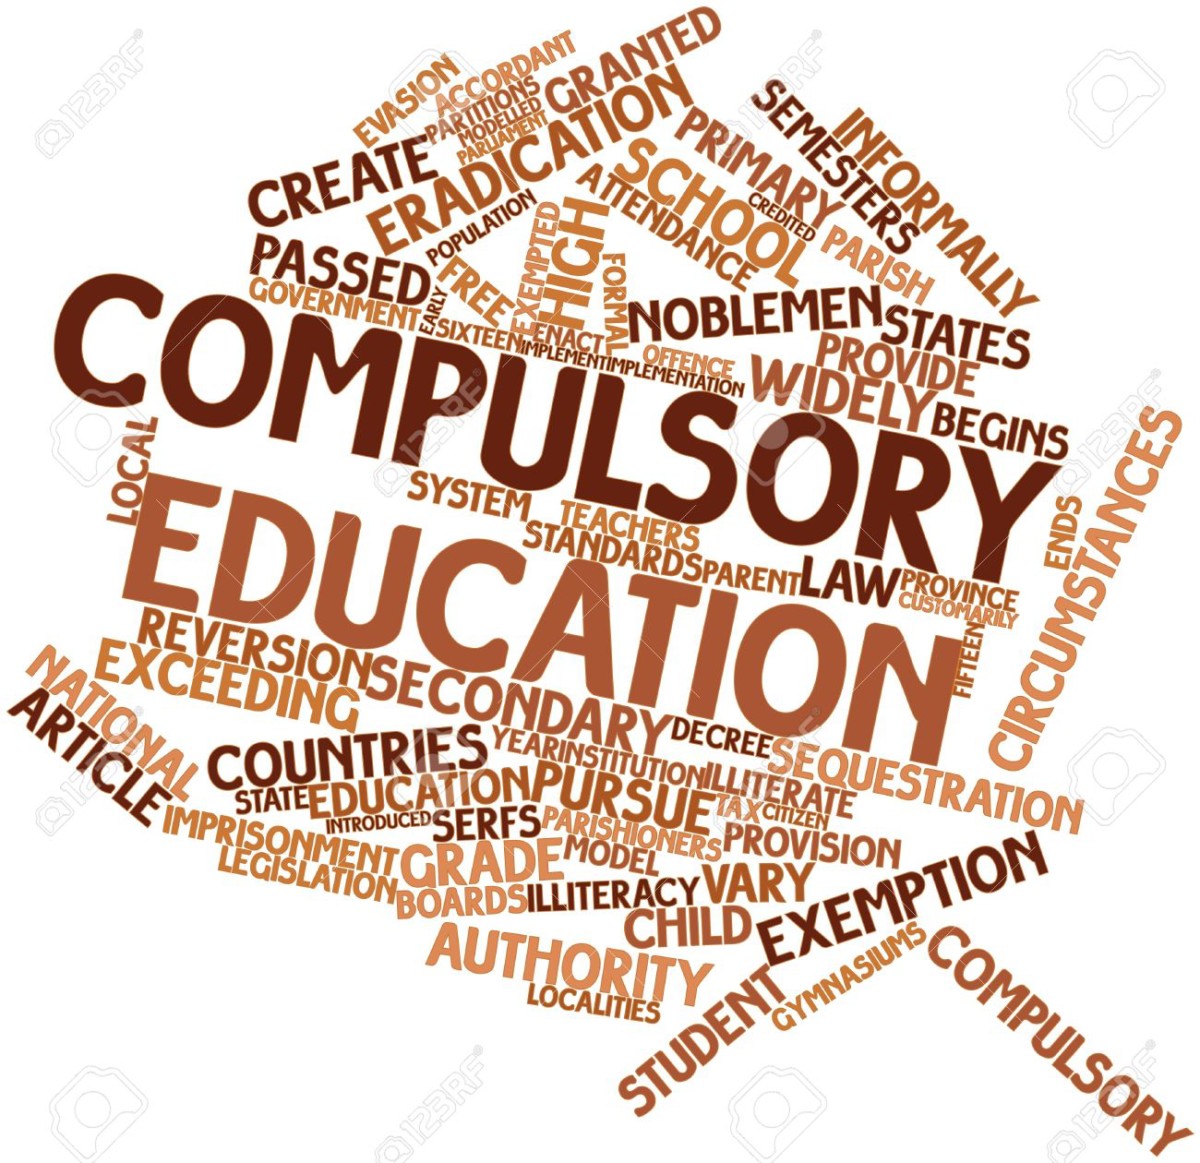 states-adding-time-to-compulsory-education-requirement-eh-a